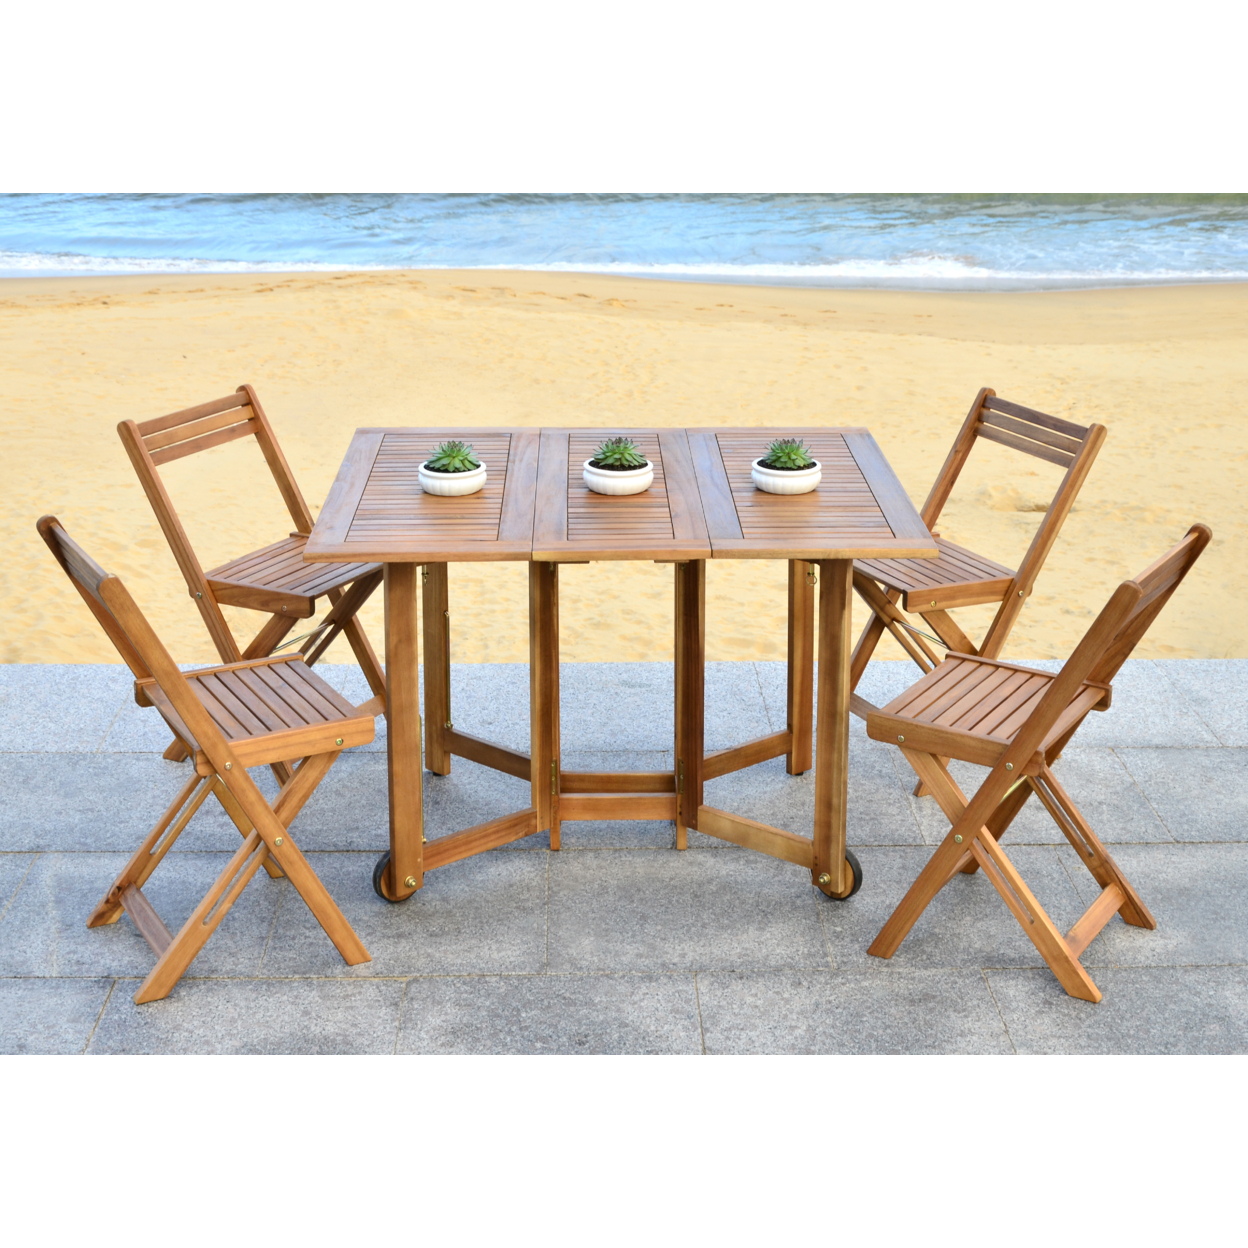 SAFAVIEH Outdoor Collection Arvin Table & 4 Chairs Natural